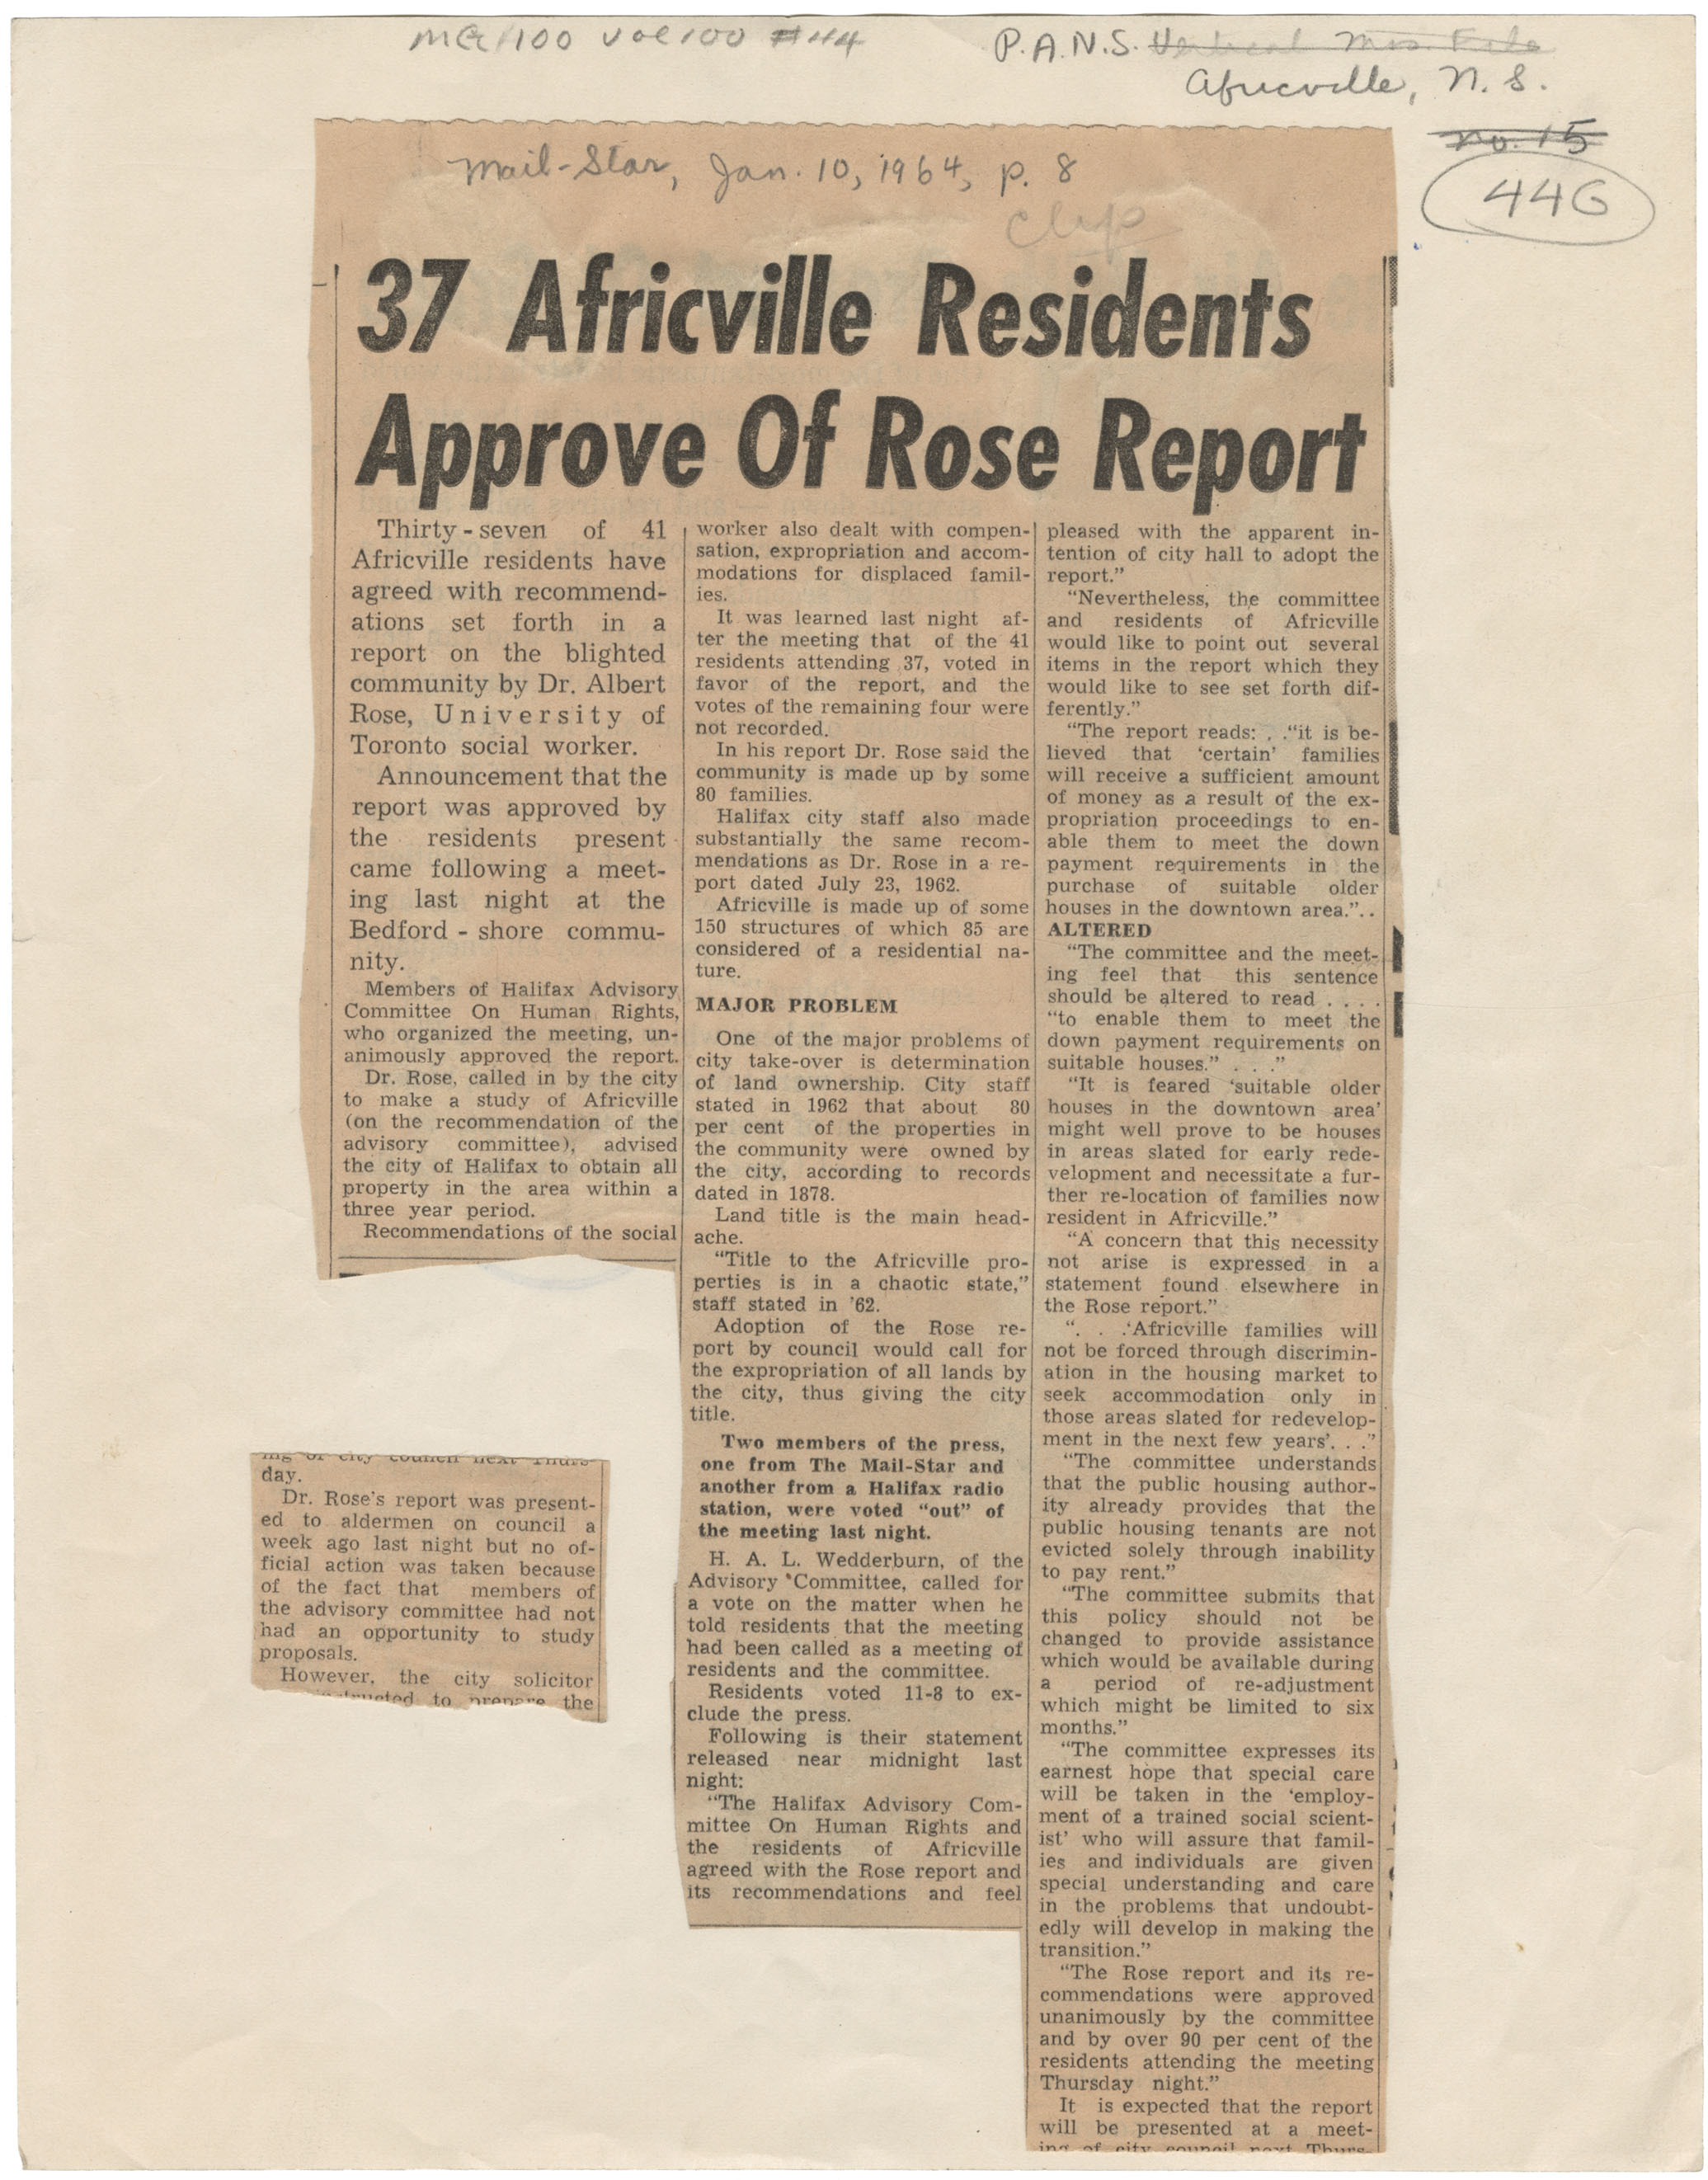 african-heritage : 37 Africville Residents Approve of Rose Report, Mail Star excerpt